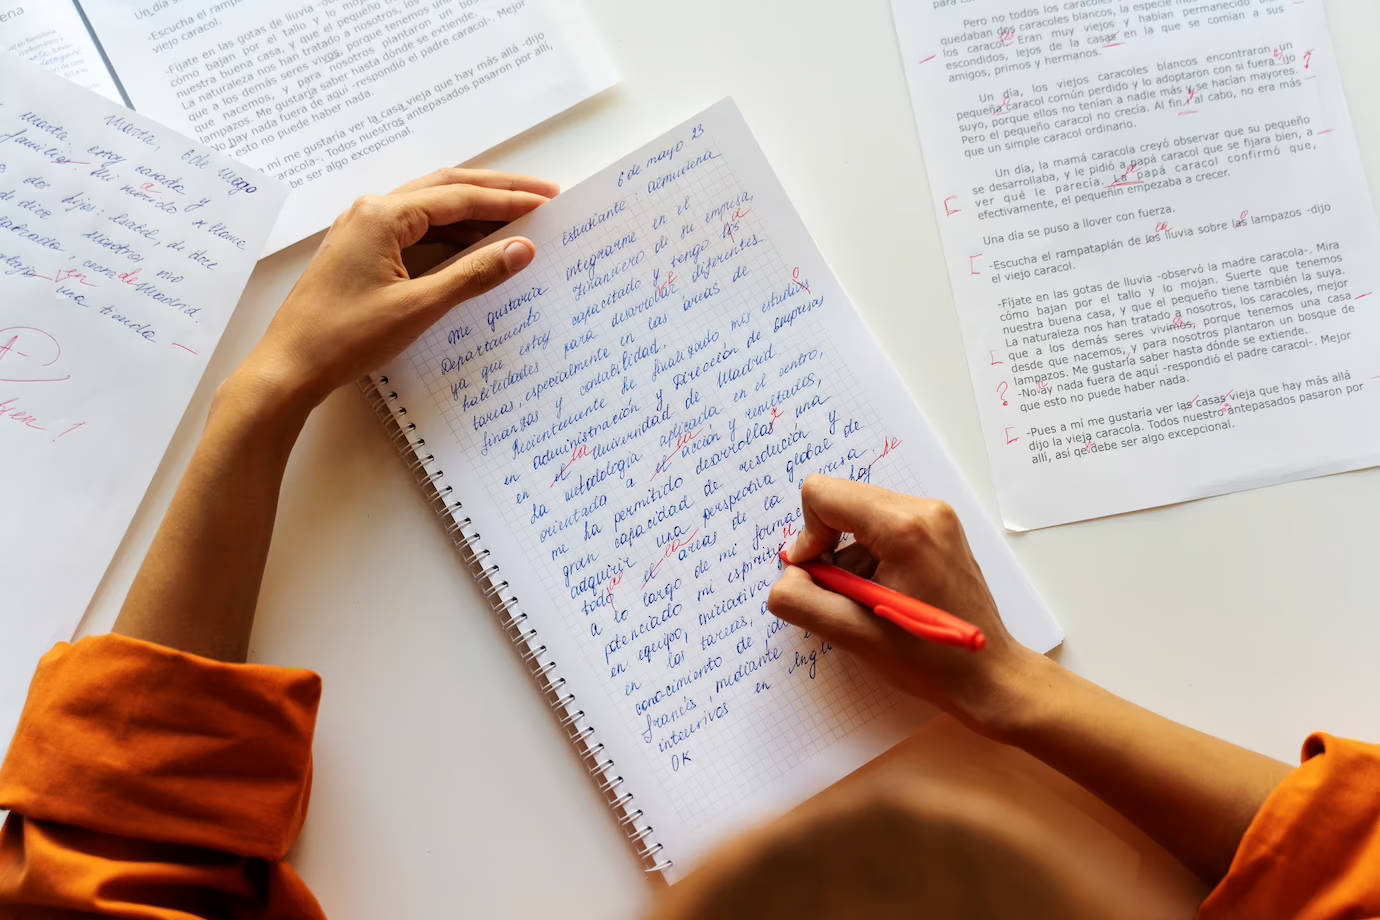 A person writing an essay on a paper